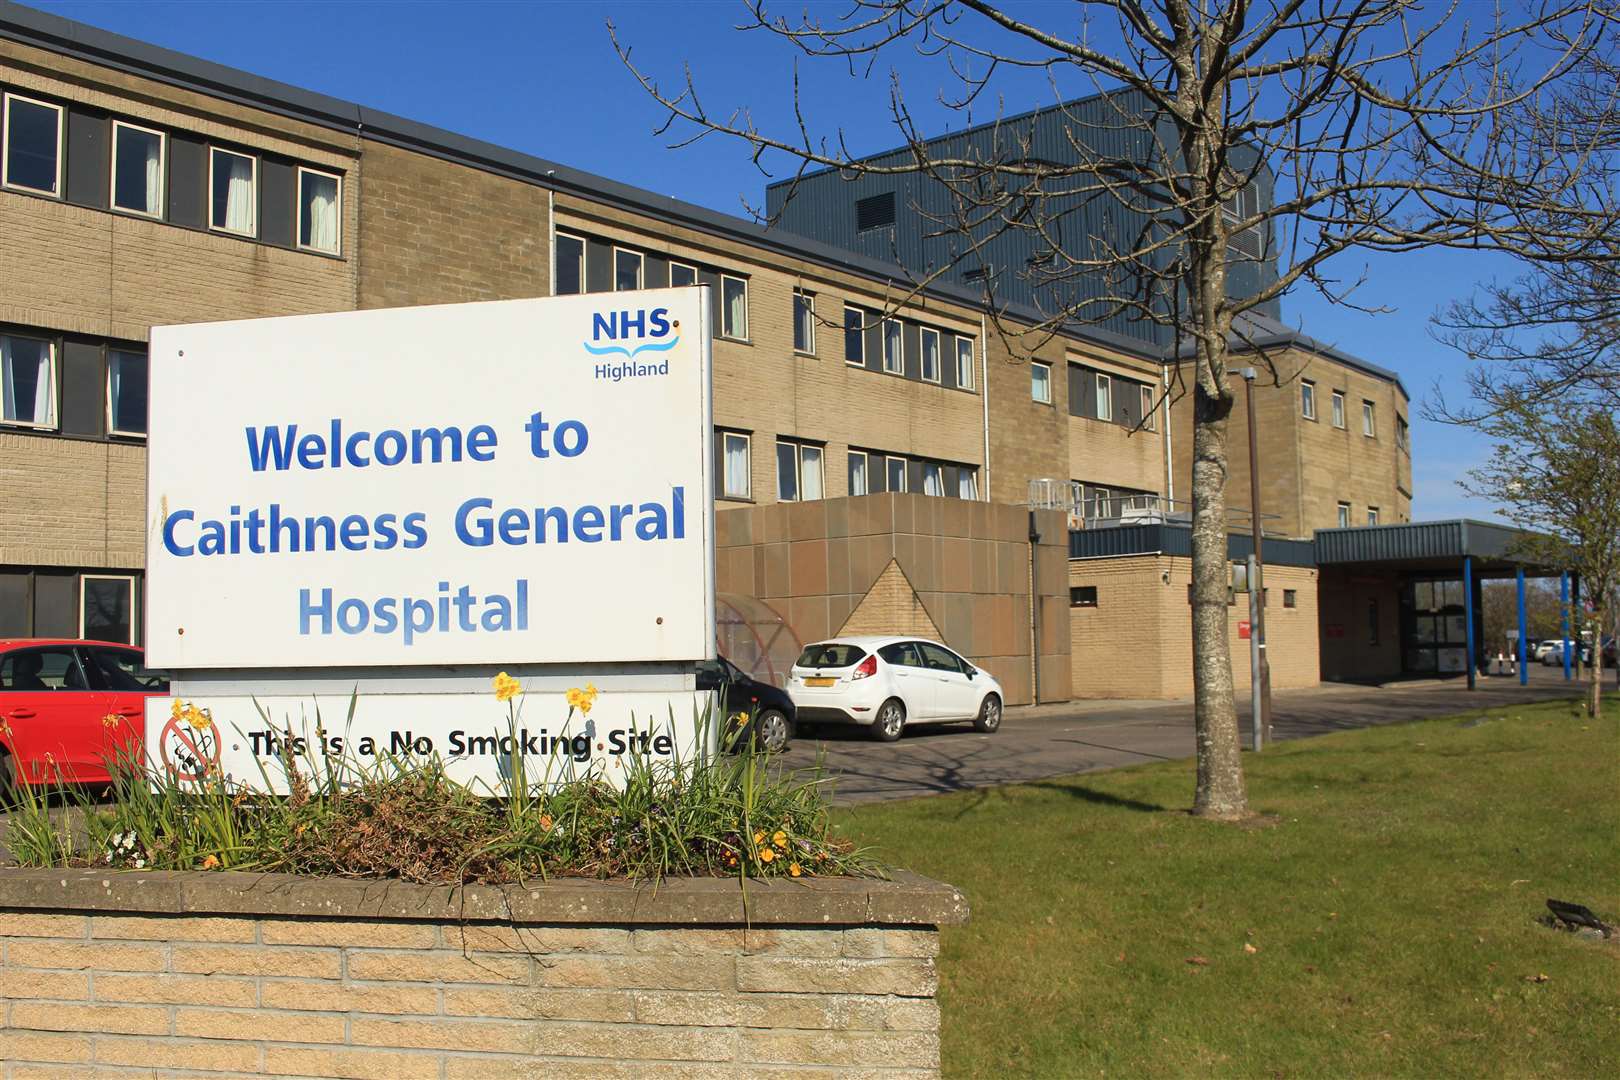 Caithness General Hospital in Wick.